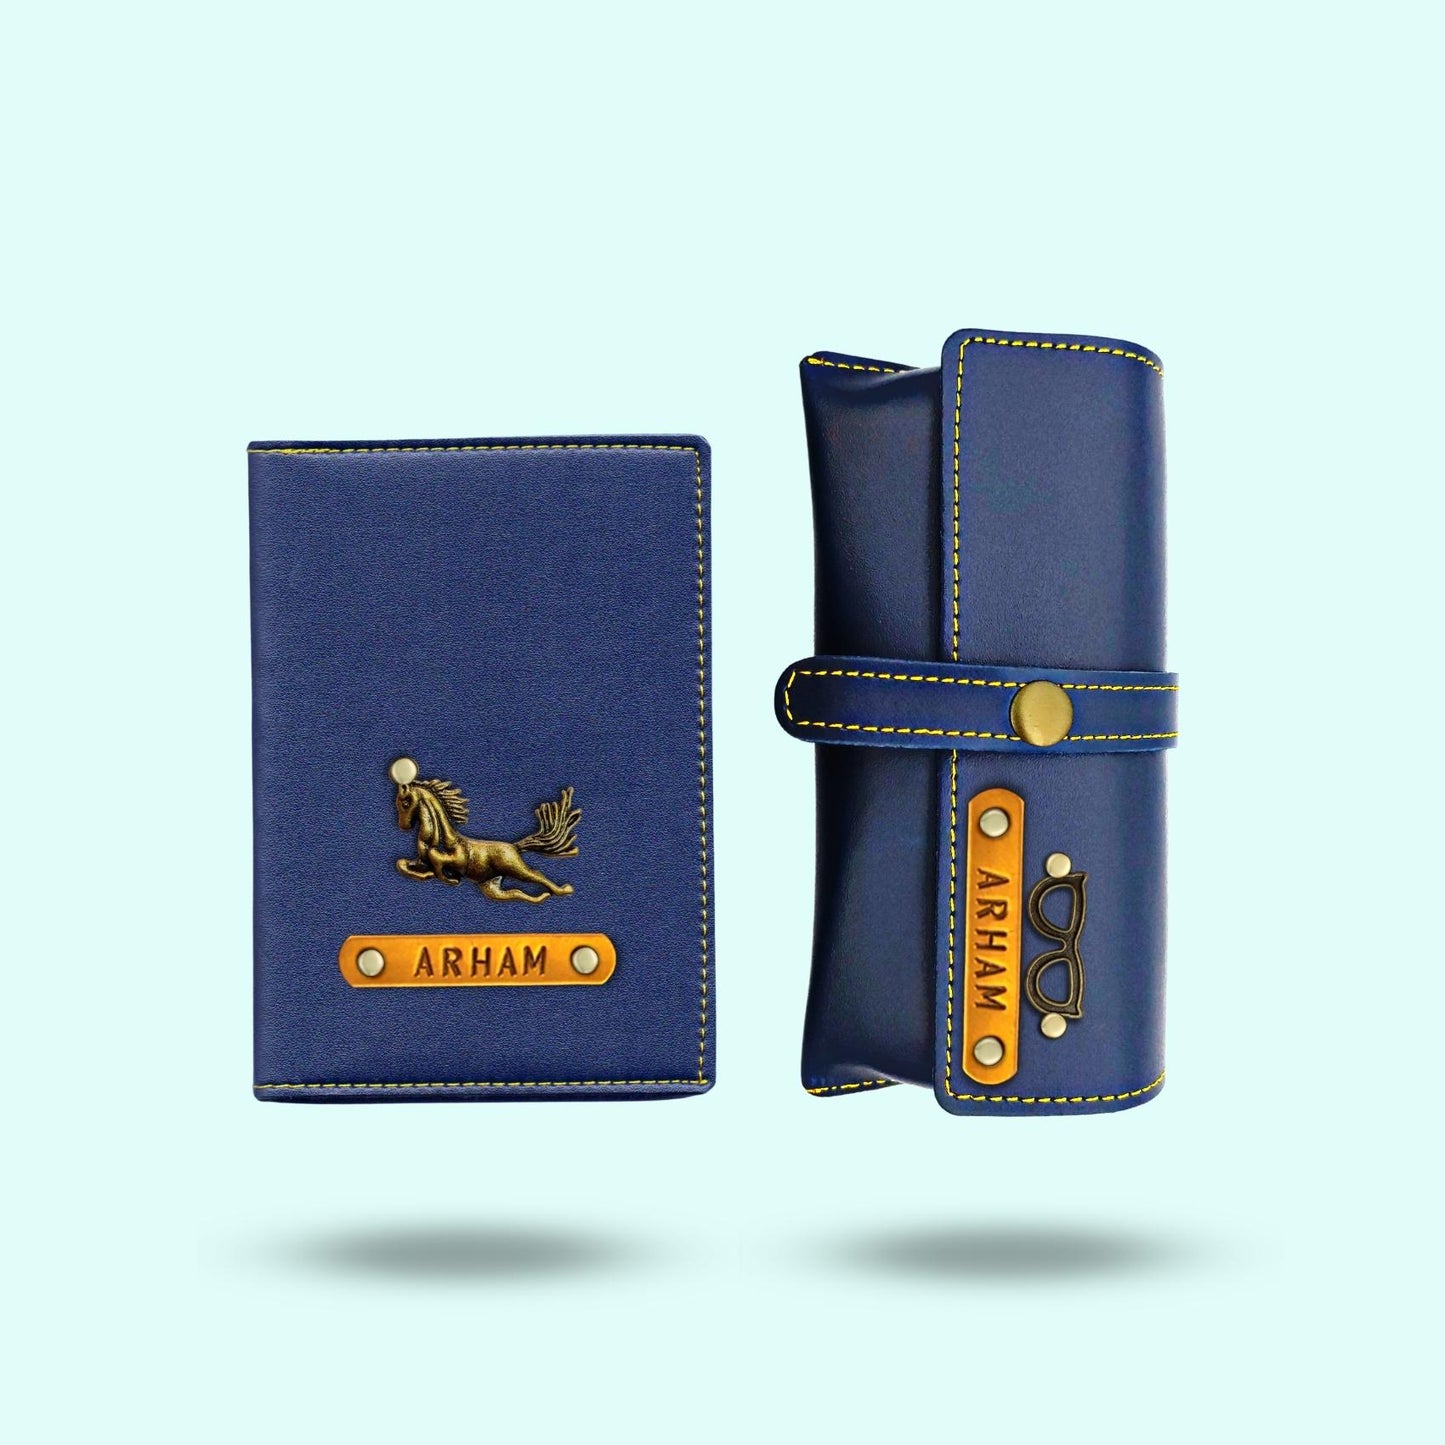 Personalized Passport Cover and Sunglass Case - Combo